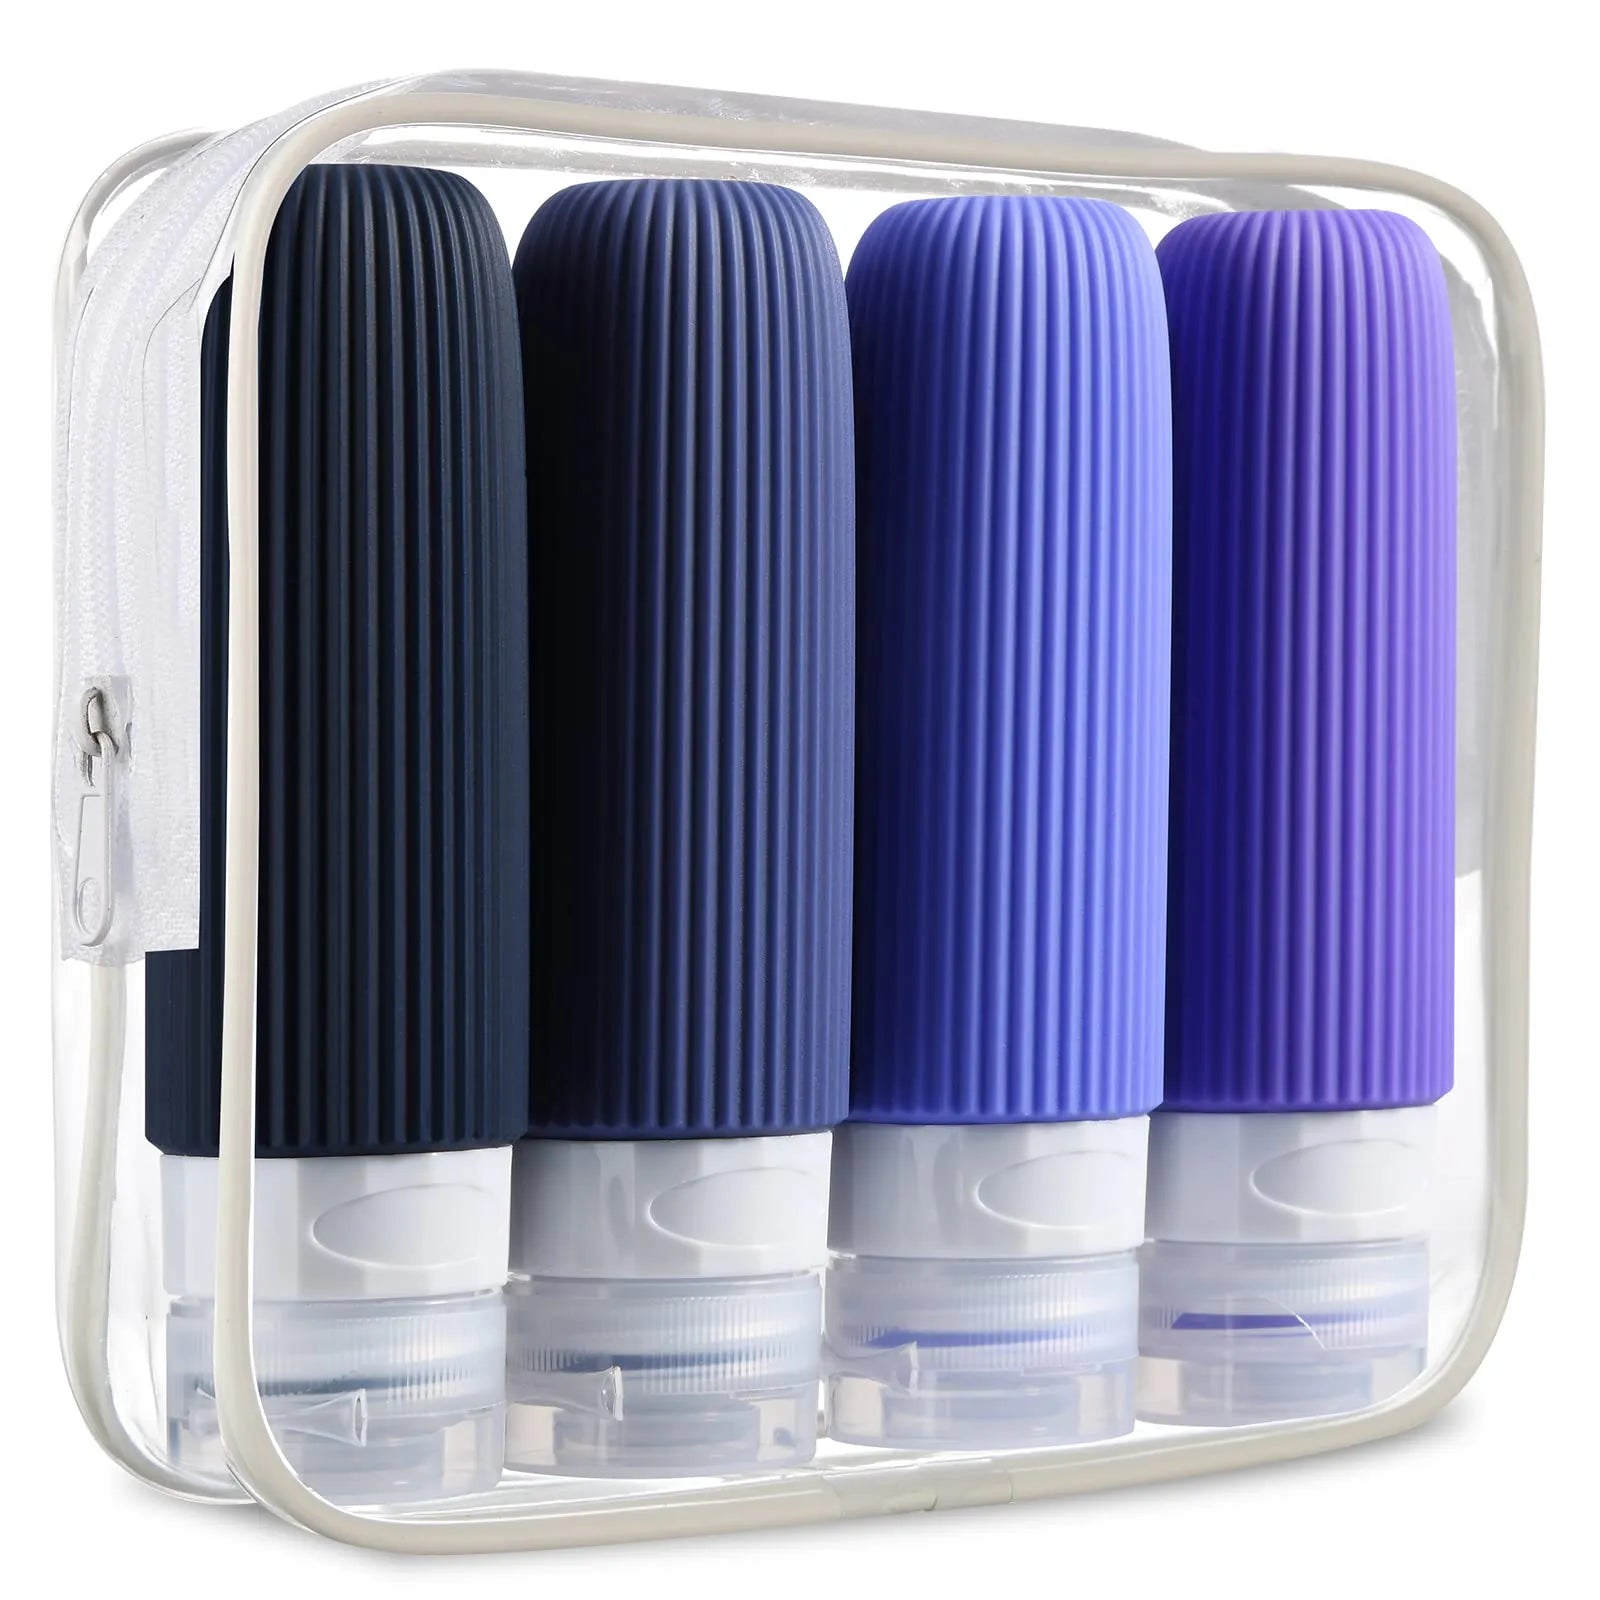 Silicone Travel Bottles Accessories Tsa Approved Portable BPA Free Leak Proof Squeezable Size Containers